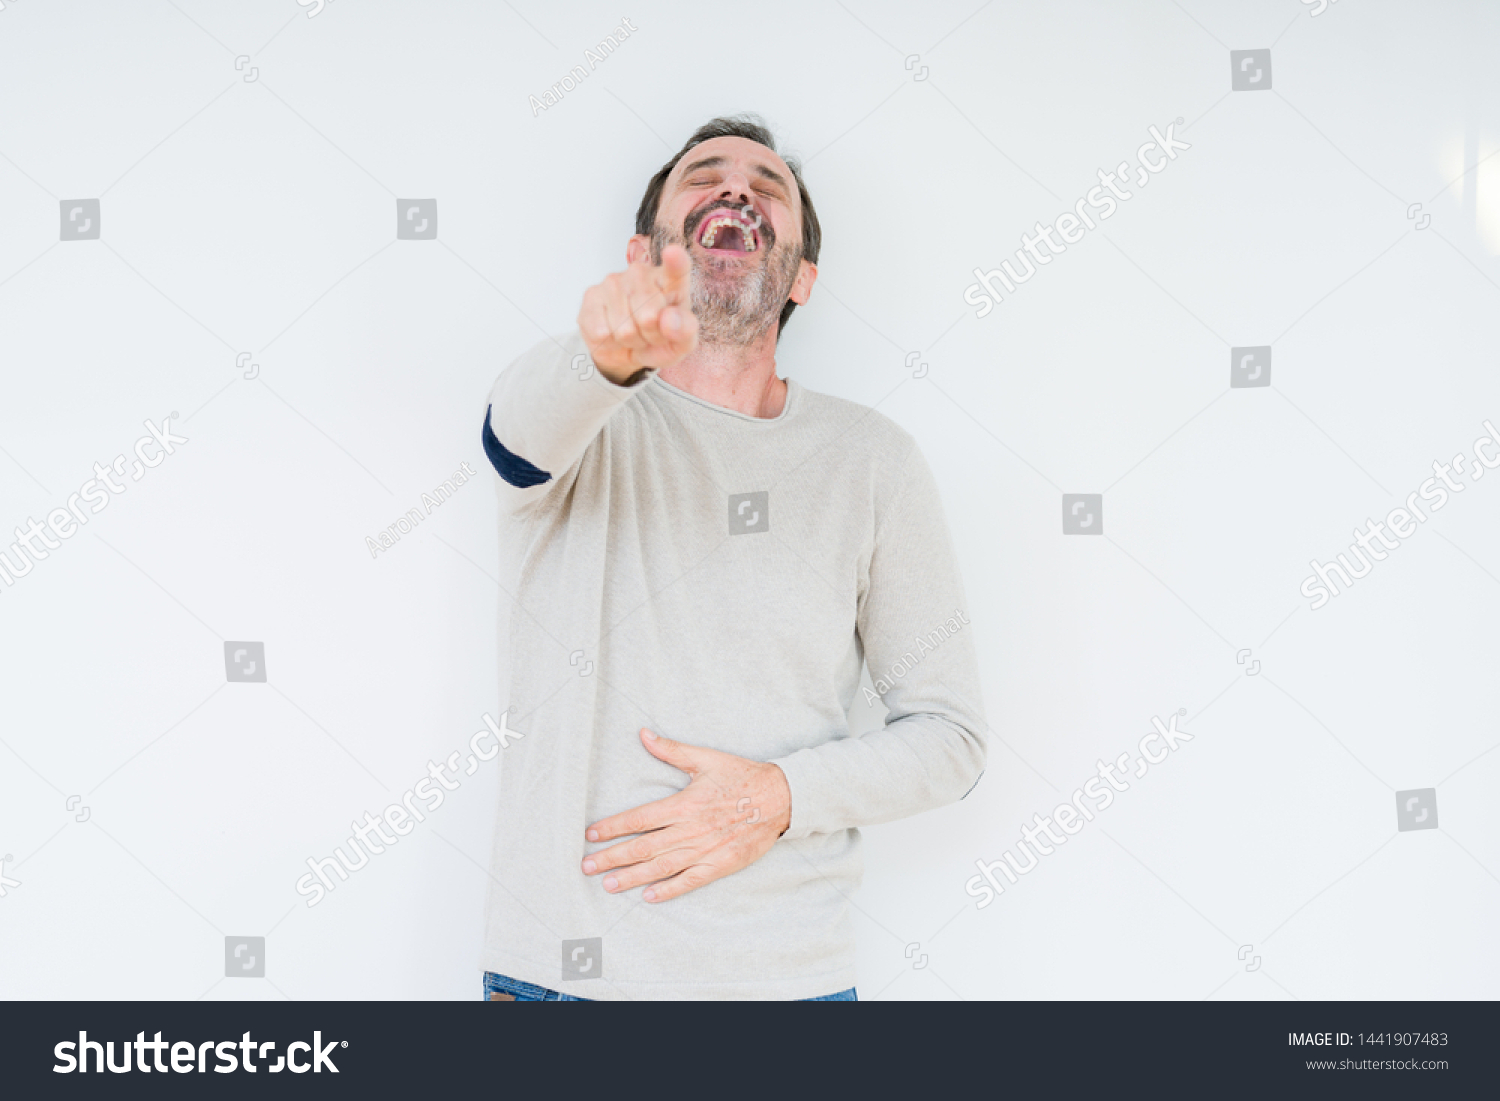 Elegant senior man over isolated background Laughing of you, pointing to the camera with finger hand over chest, shame expression #1441907483